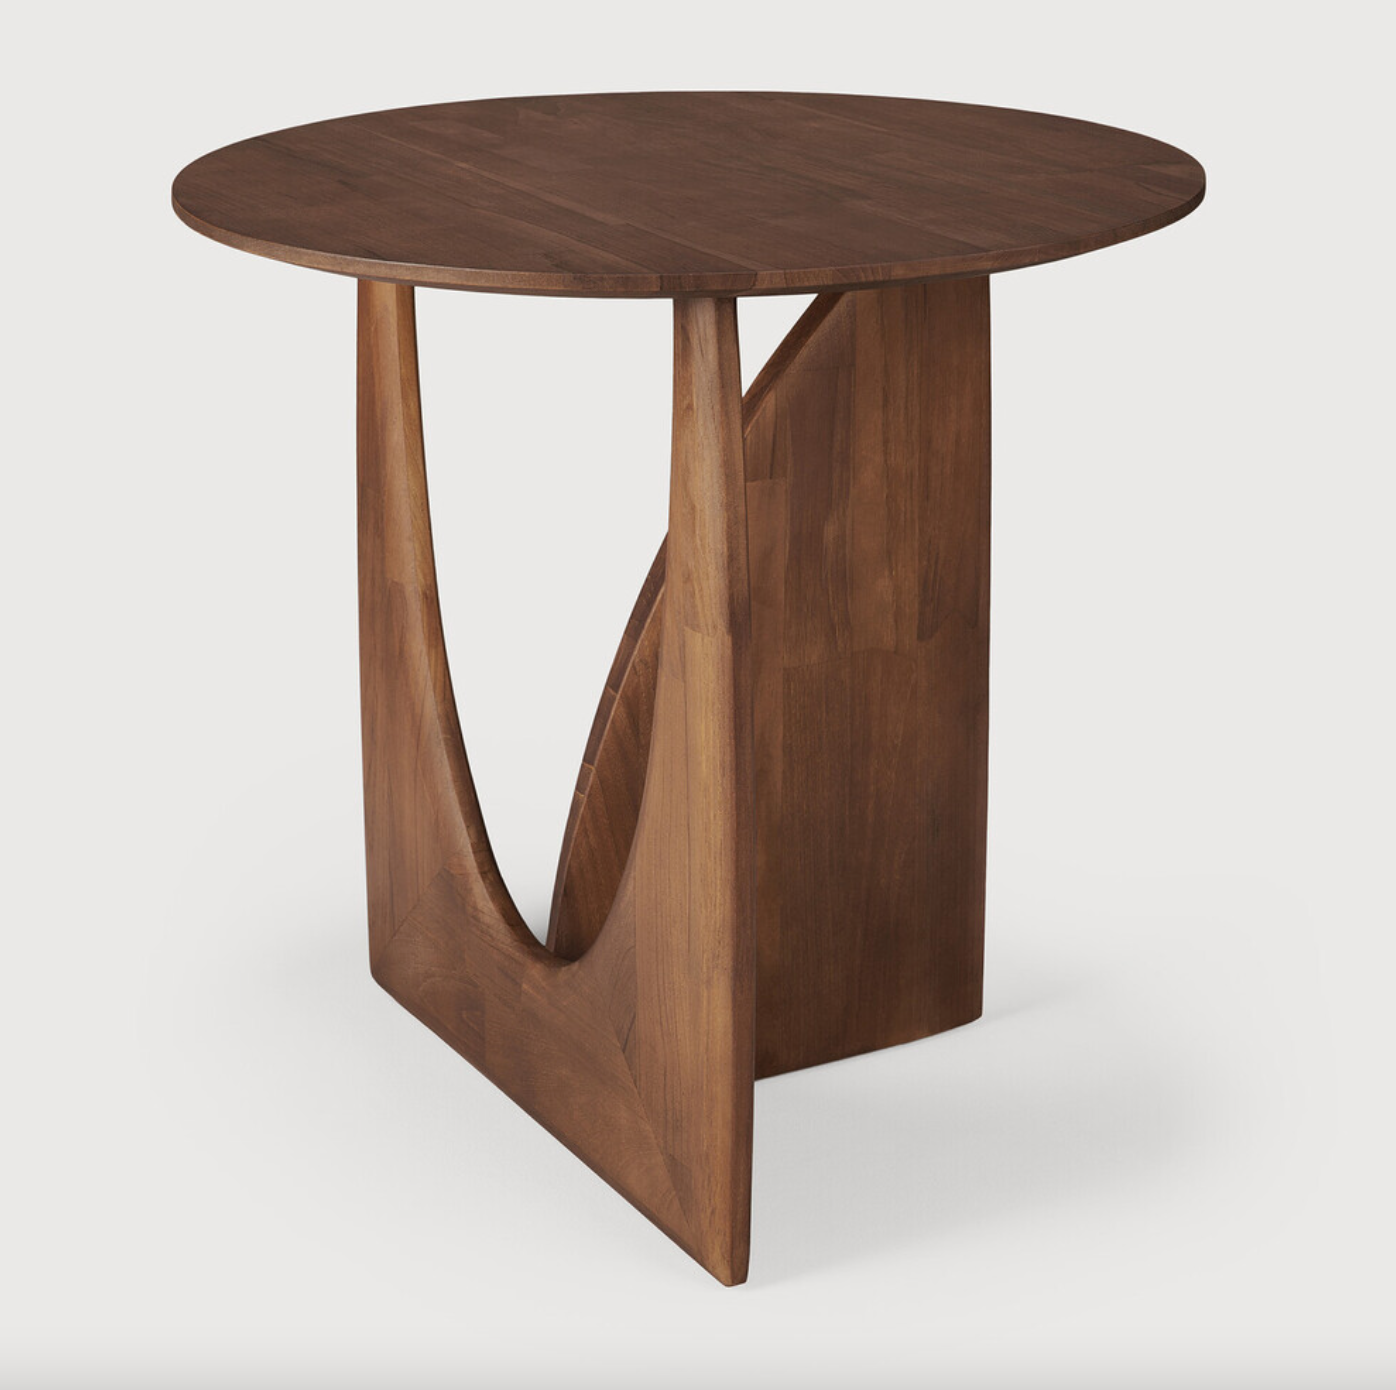 From any angle, the Teak Geometric Side Table does not only look different, it also becomes different. We love seeing this table as a sculptural accent to your living space or office.  Designed by Alain van Havre  Dimensions: 20.5"w x 20.5"d x 20"h  Weight: 11 lbs  Material: Teak Finish: Varnished